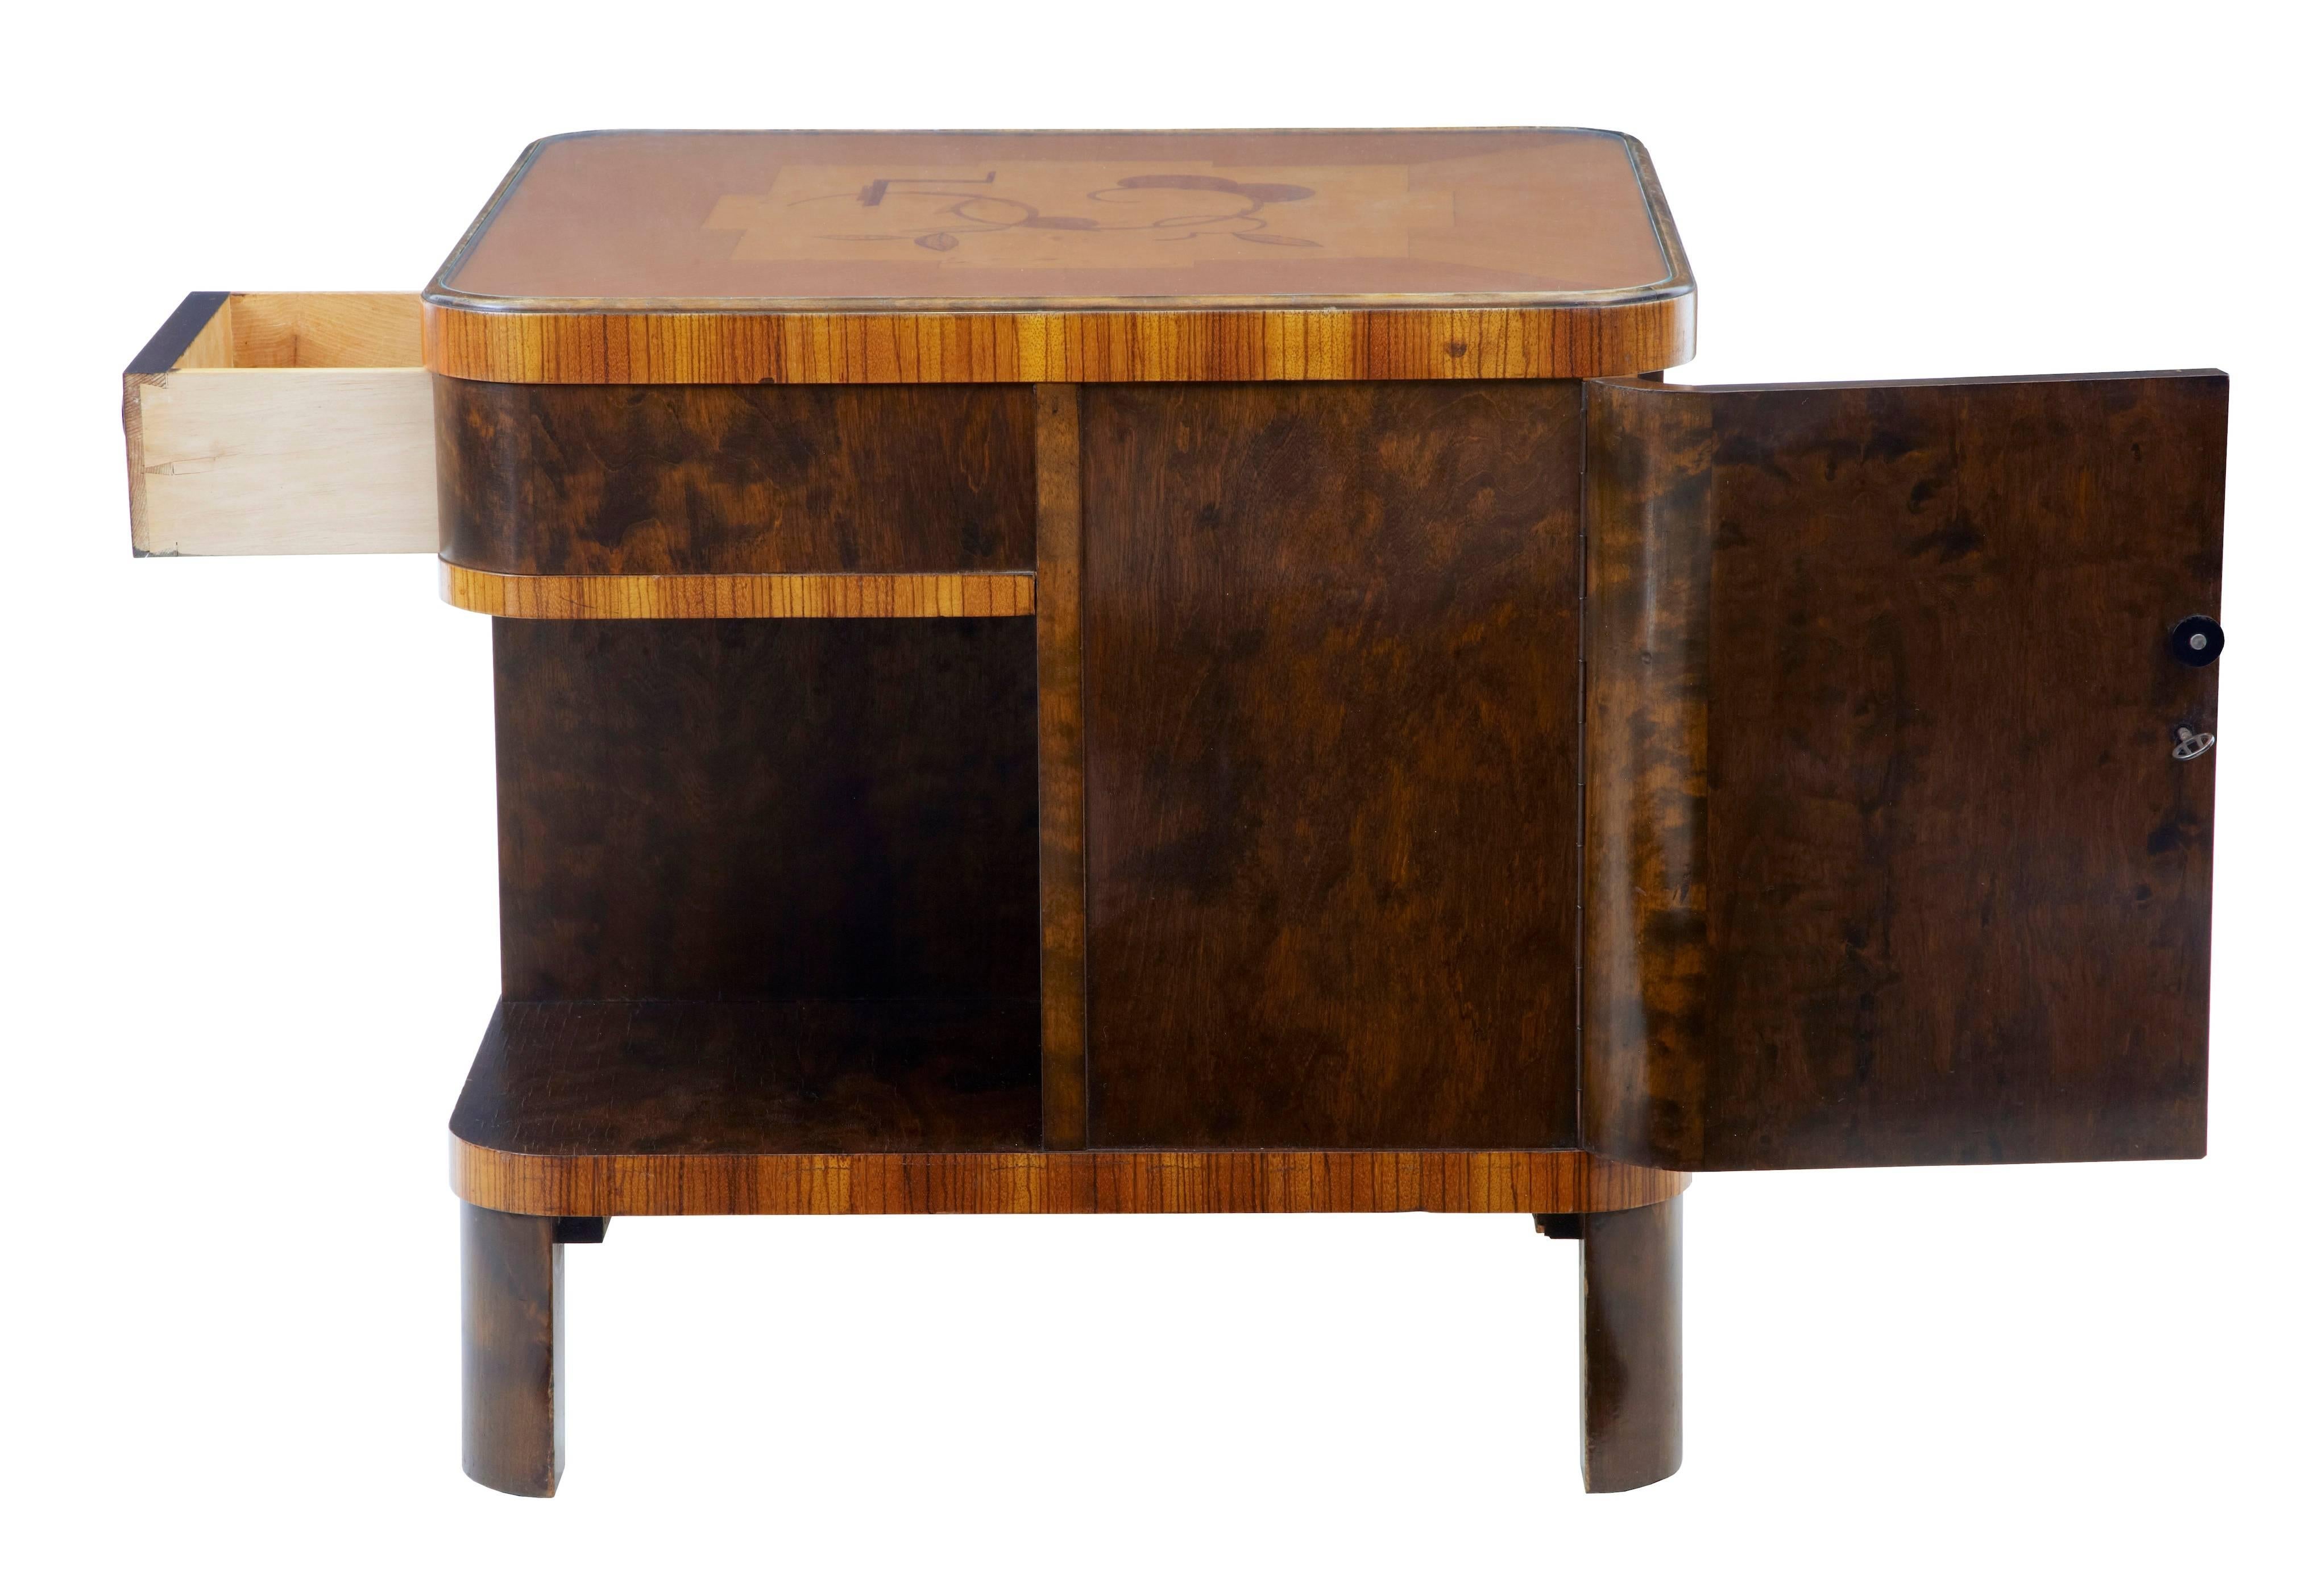 Good quality two-tone birch occasional table, circa 1930.
Rounded square in shape with a drawer, single door cupboard and open storage spaces.
Inlaid top with removable glass protection.

Measures: Height: 23